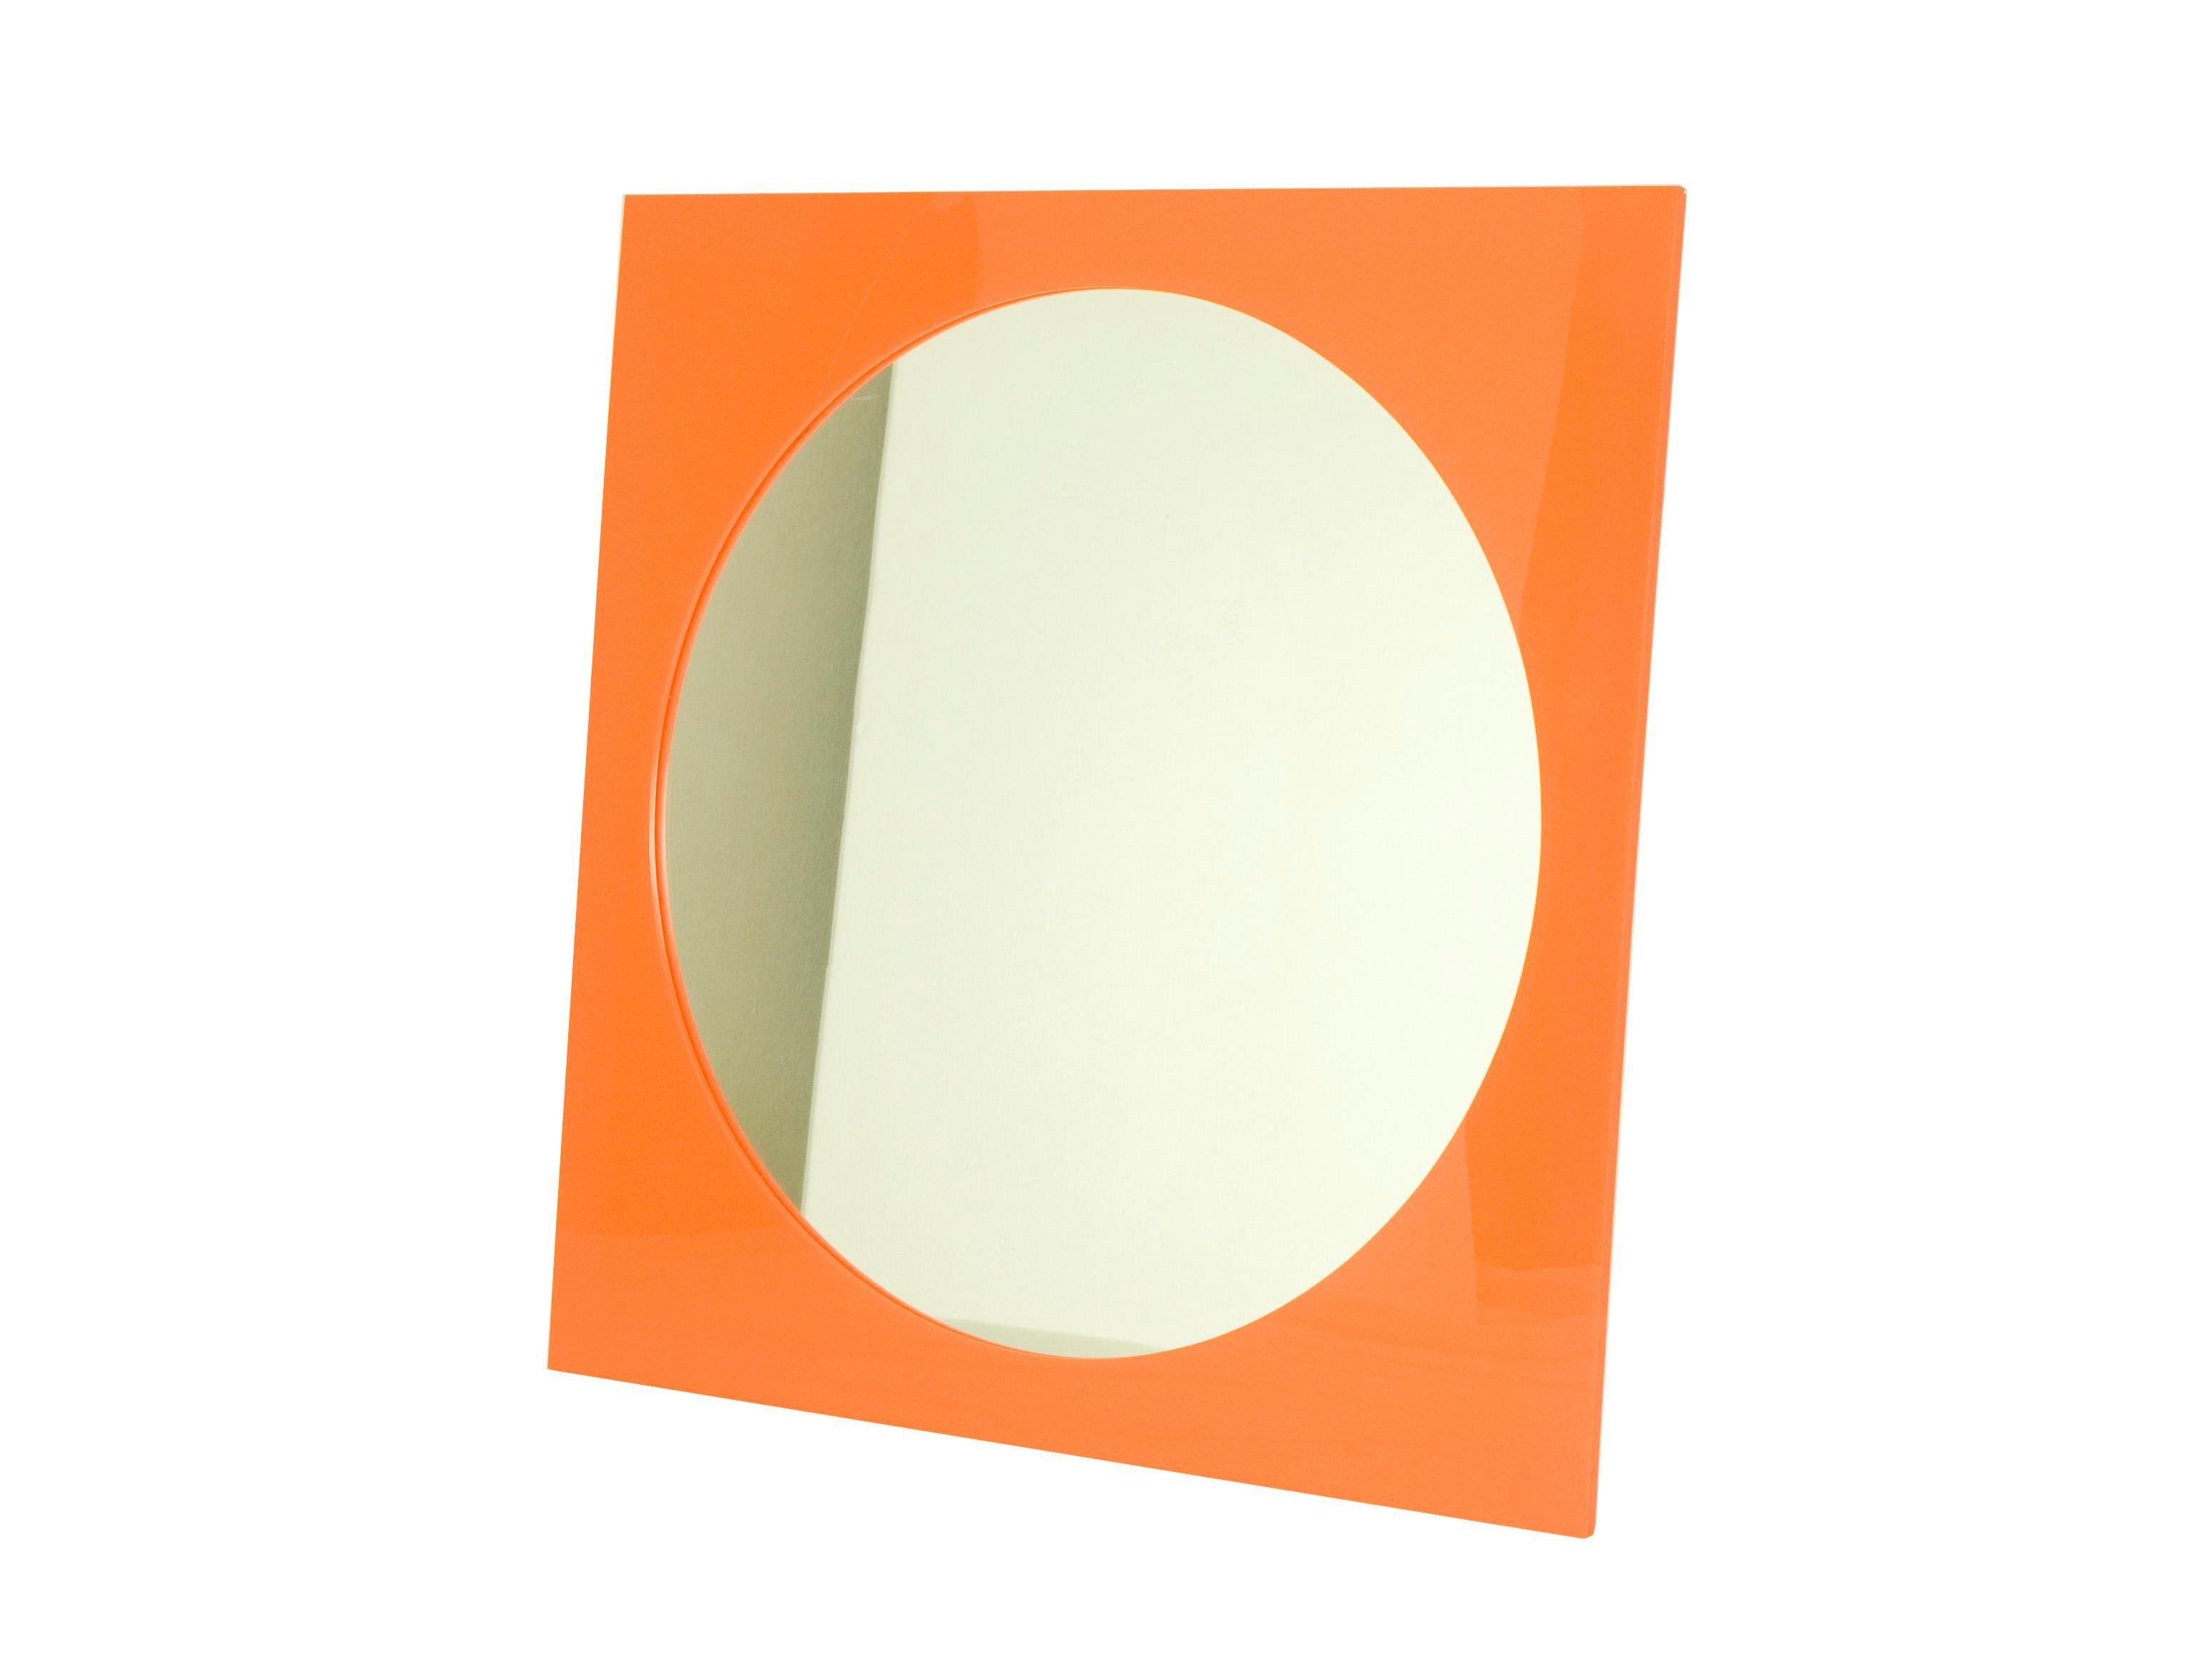 Orange methacrylate square wall mirror design by Gino Colombini and produced by Kartell in the 1970s.
Visible oxidation patina on the mirror.